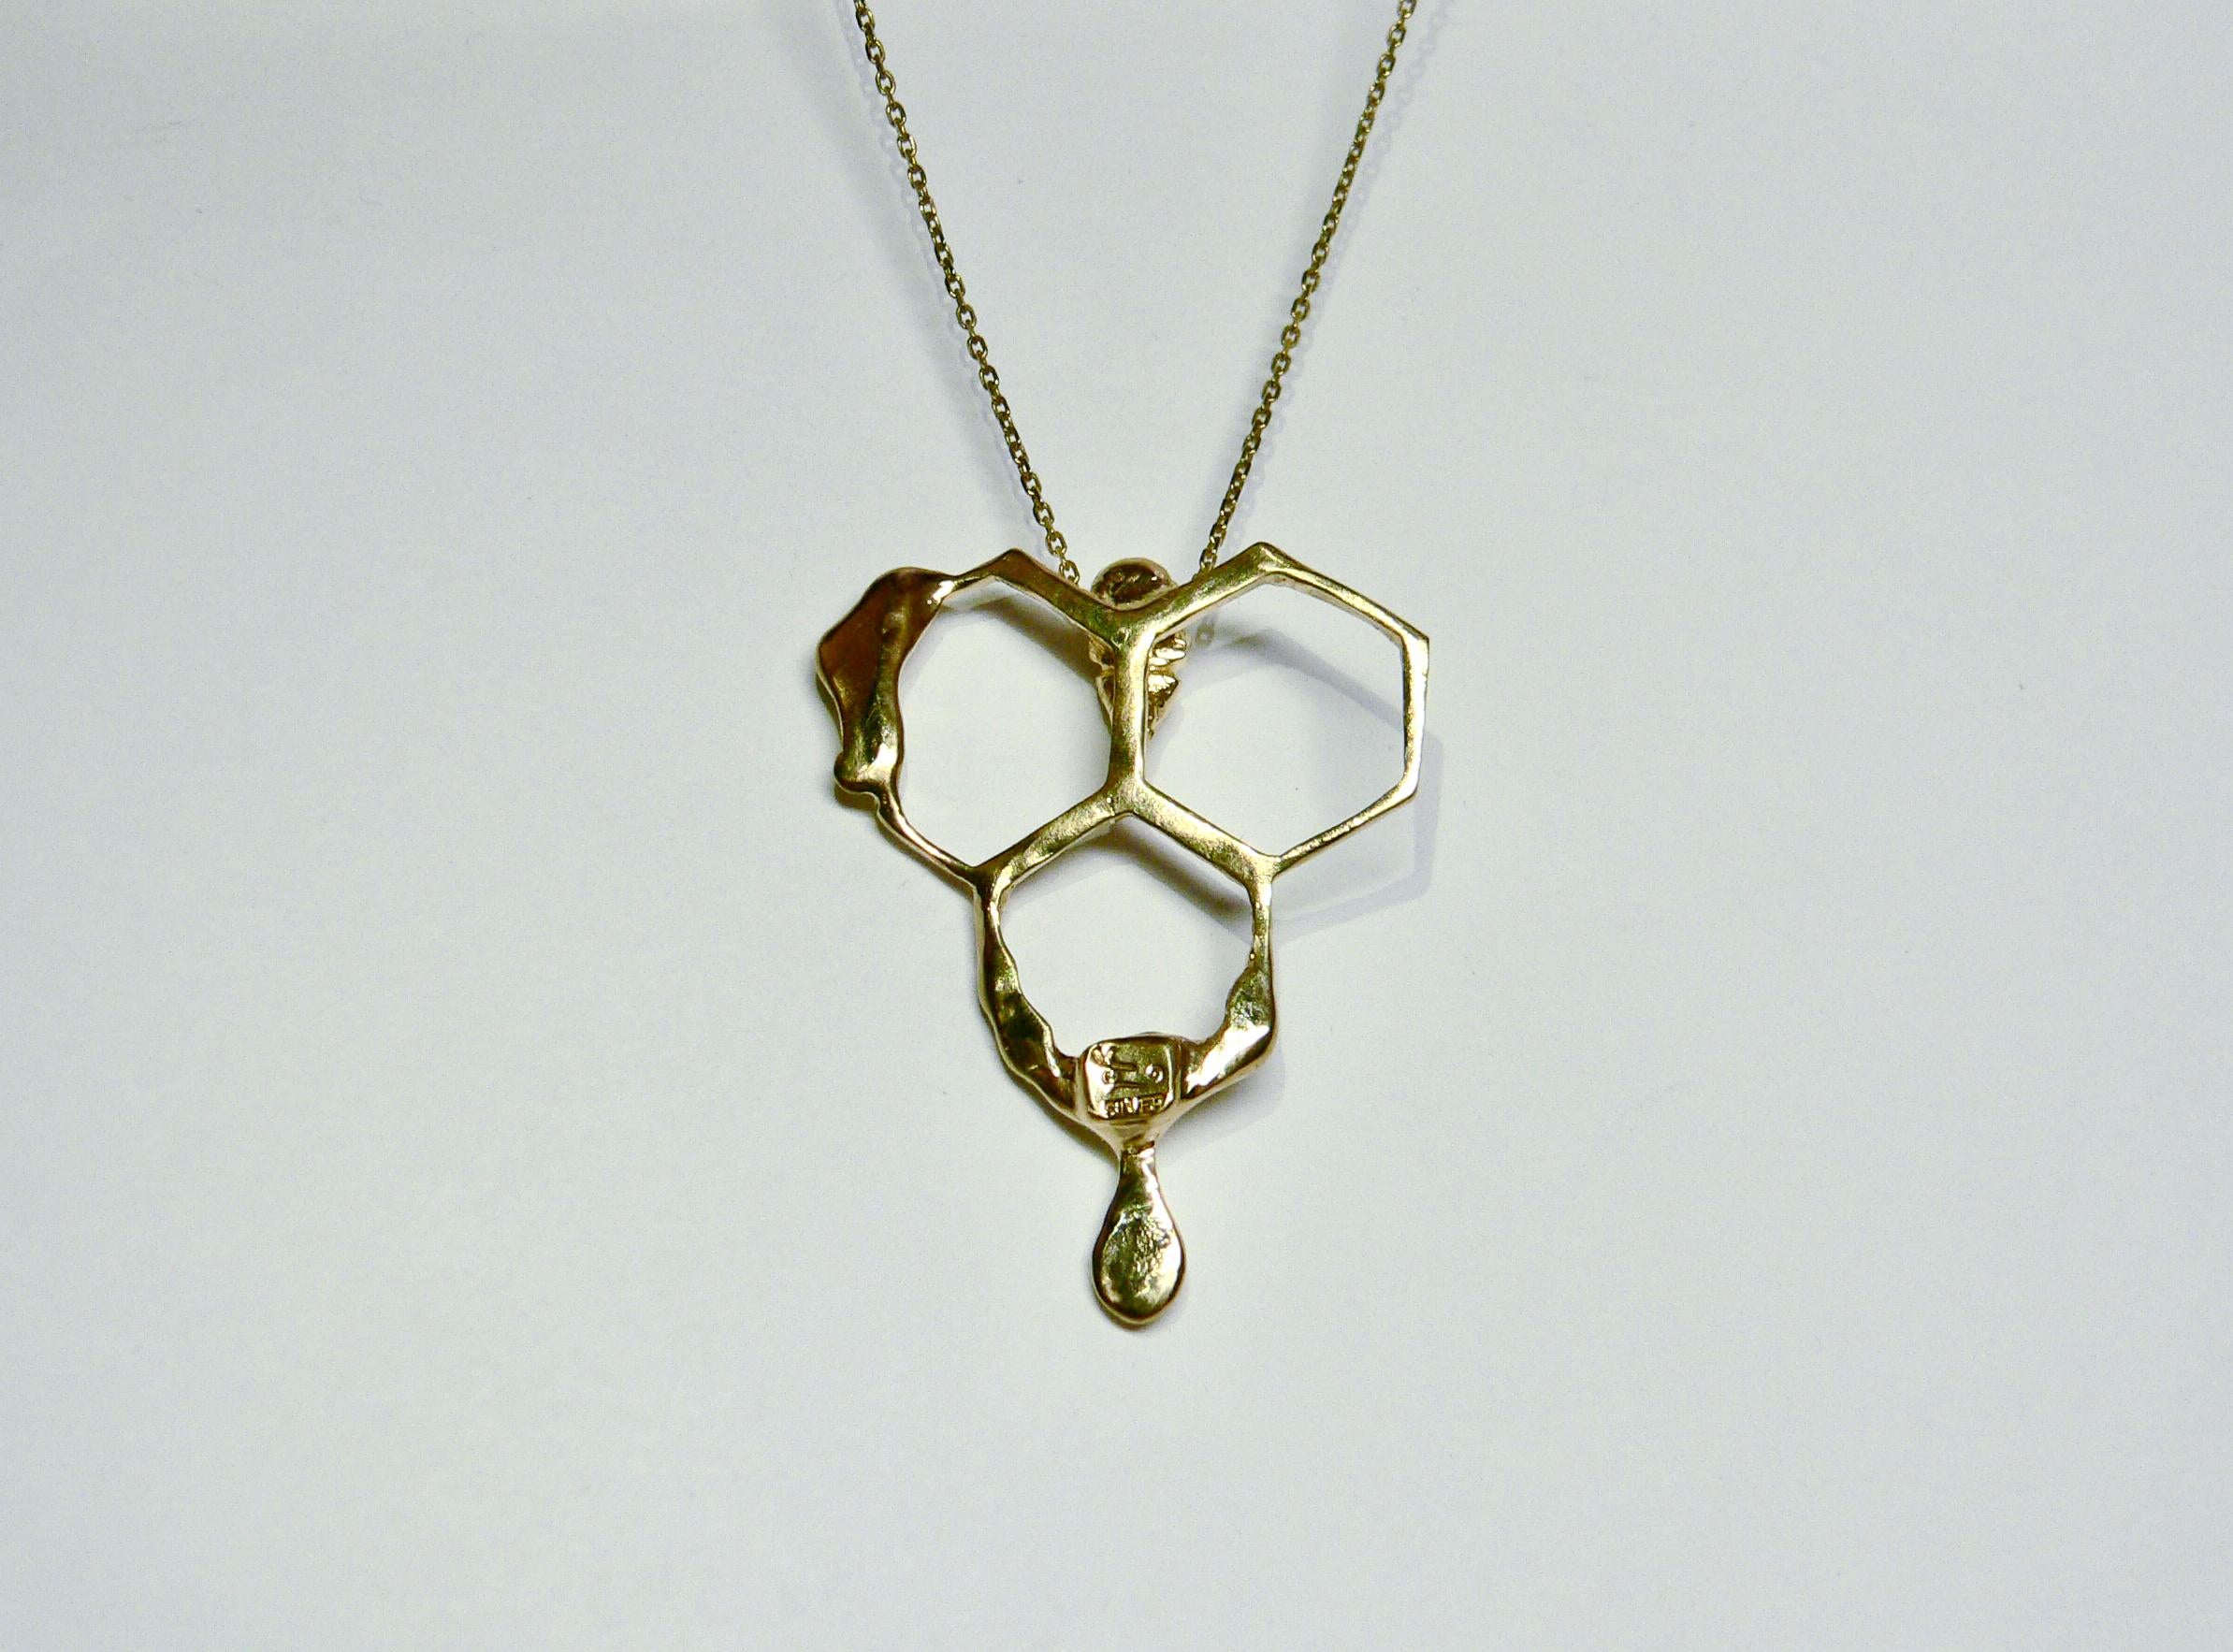 Honey Trap Pendant, Sterling Silver with 18 Karat Gold-Plate For Sale 2